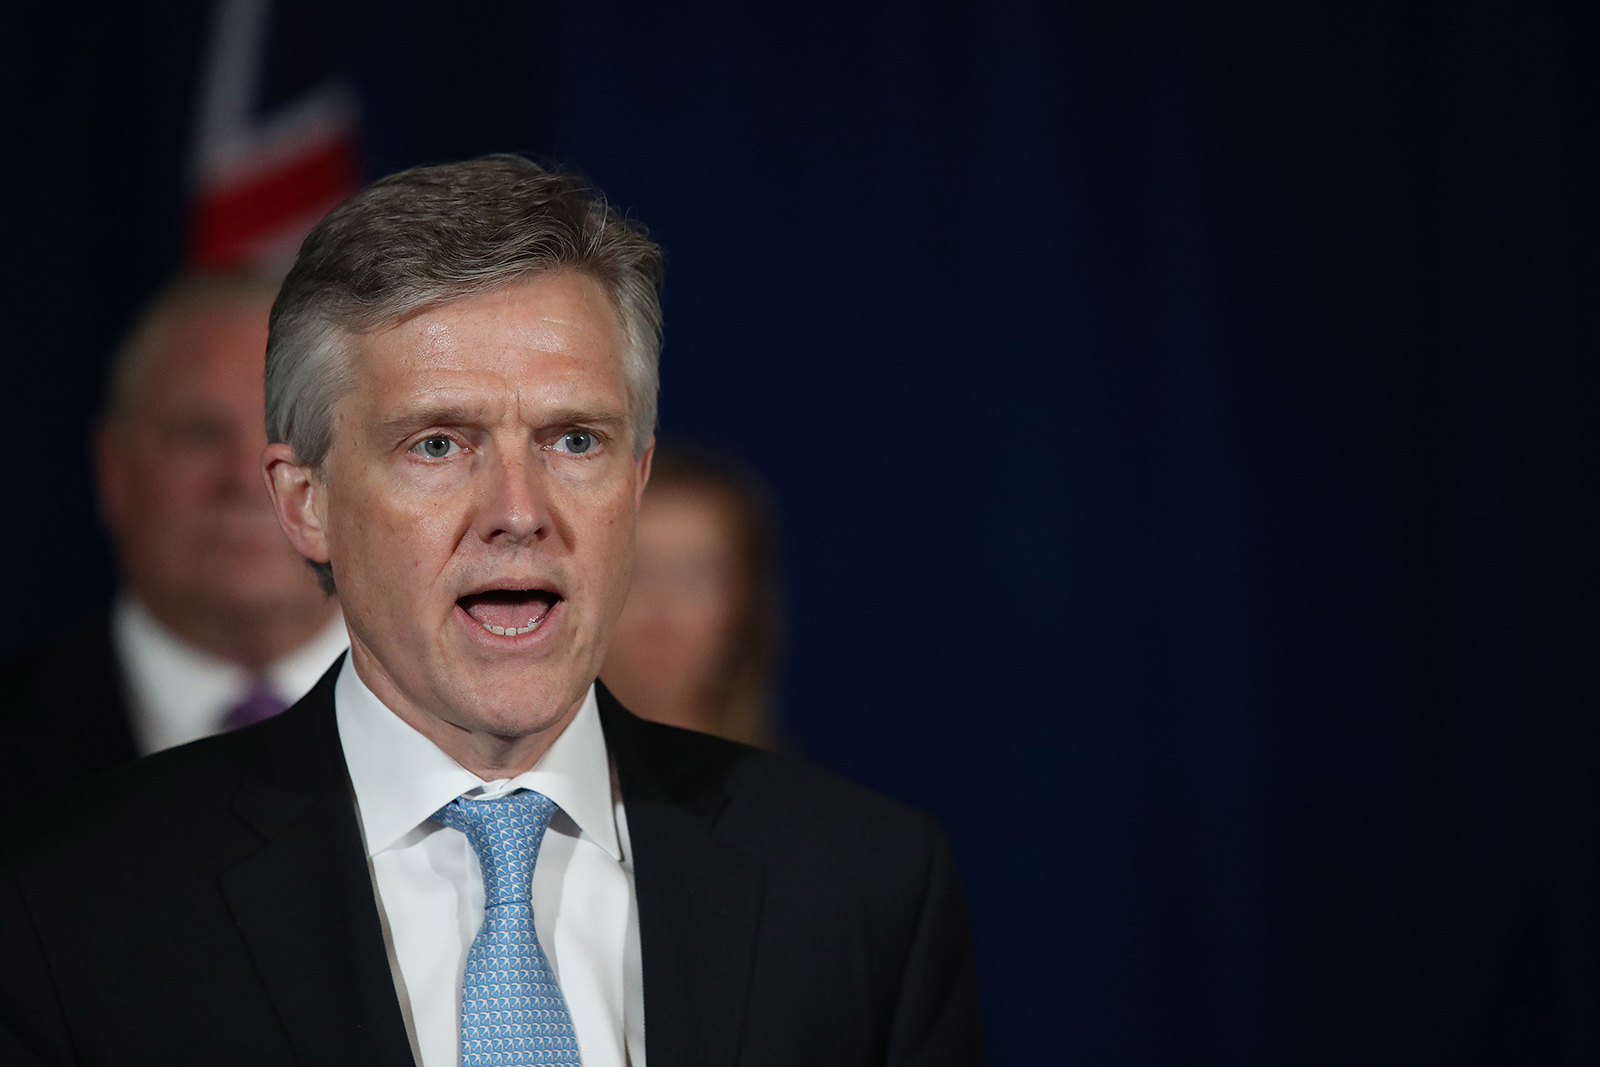 Rod Phillips, Minister of Finance, answers questions at a daily press conference in Toronto, on June 5, 2020.